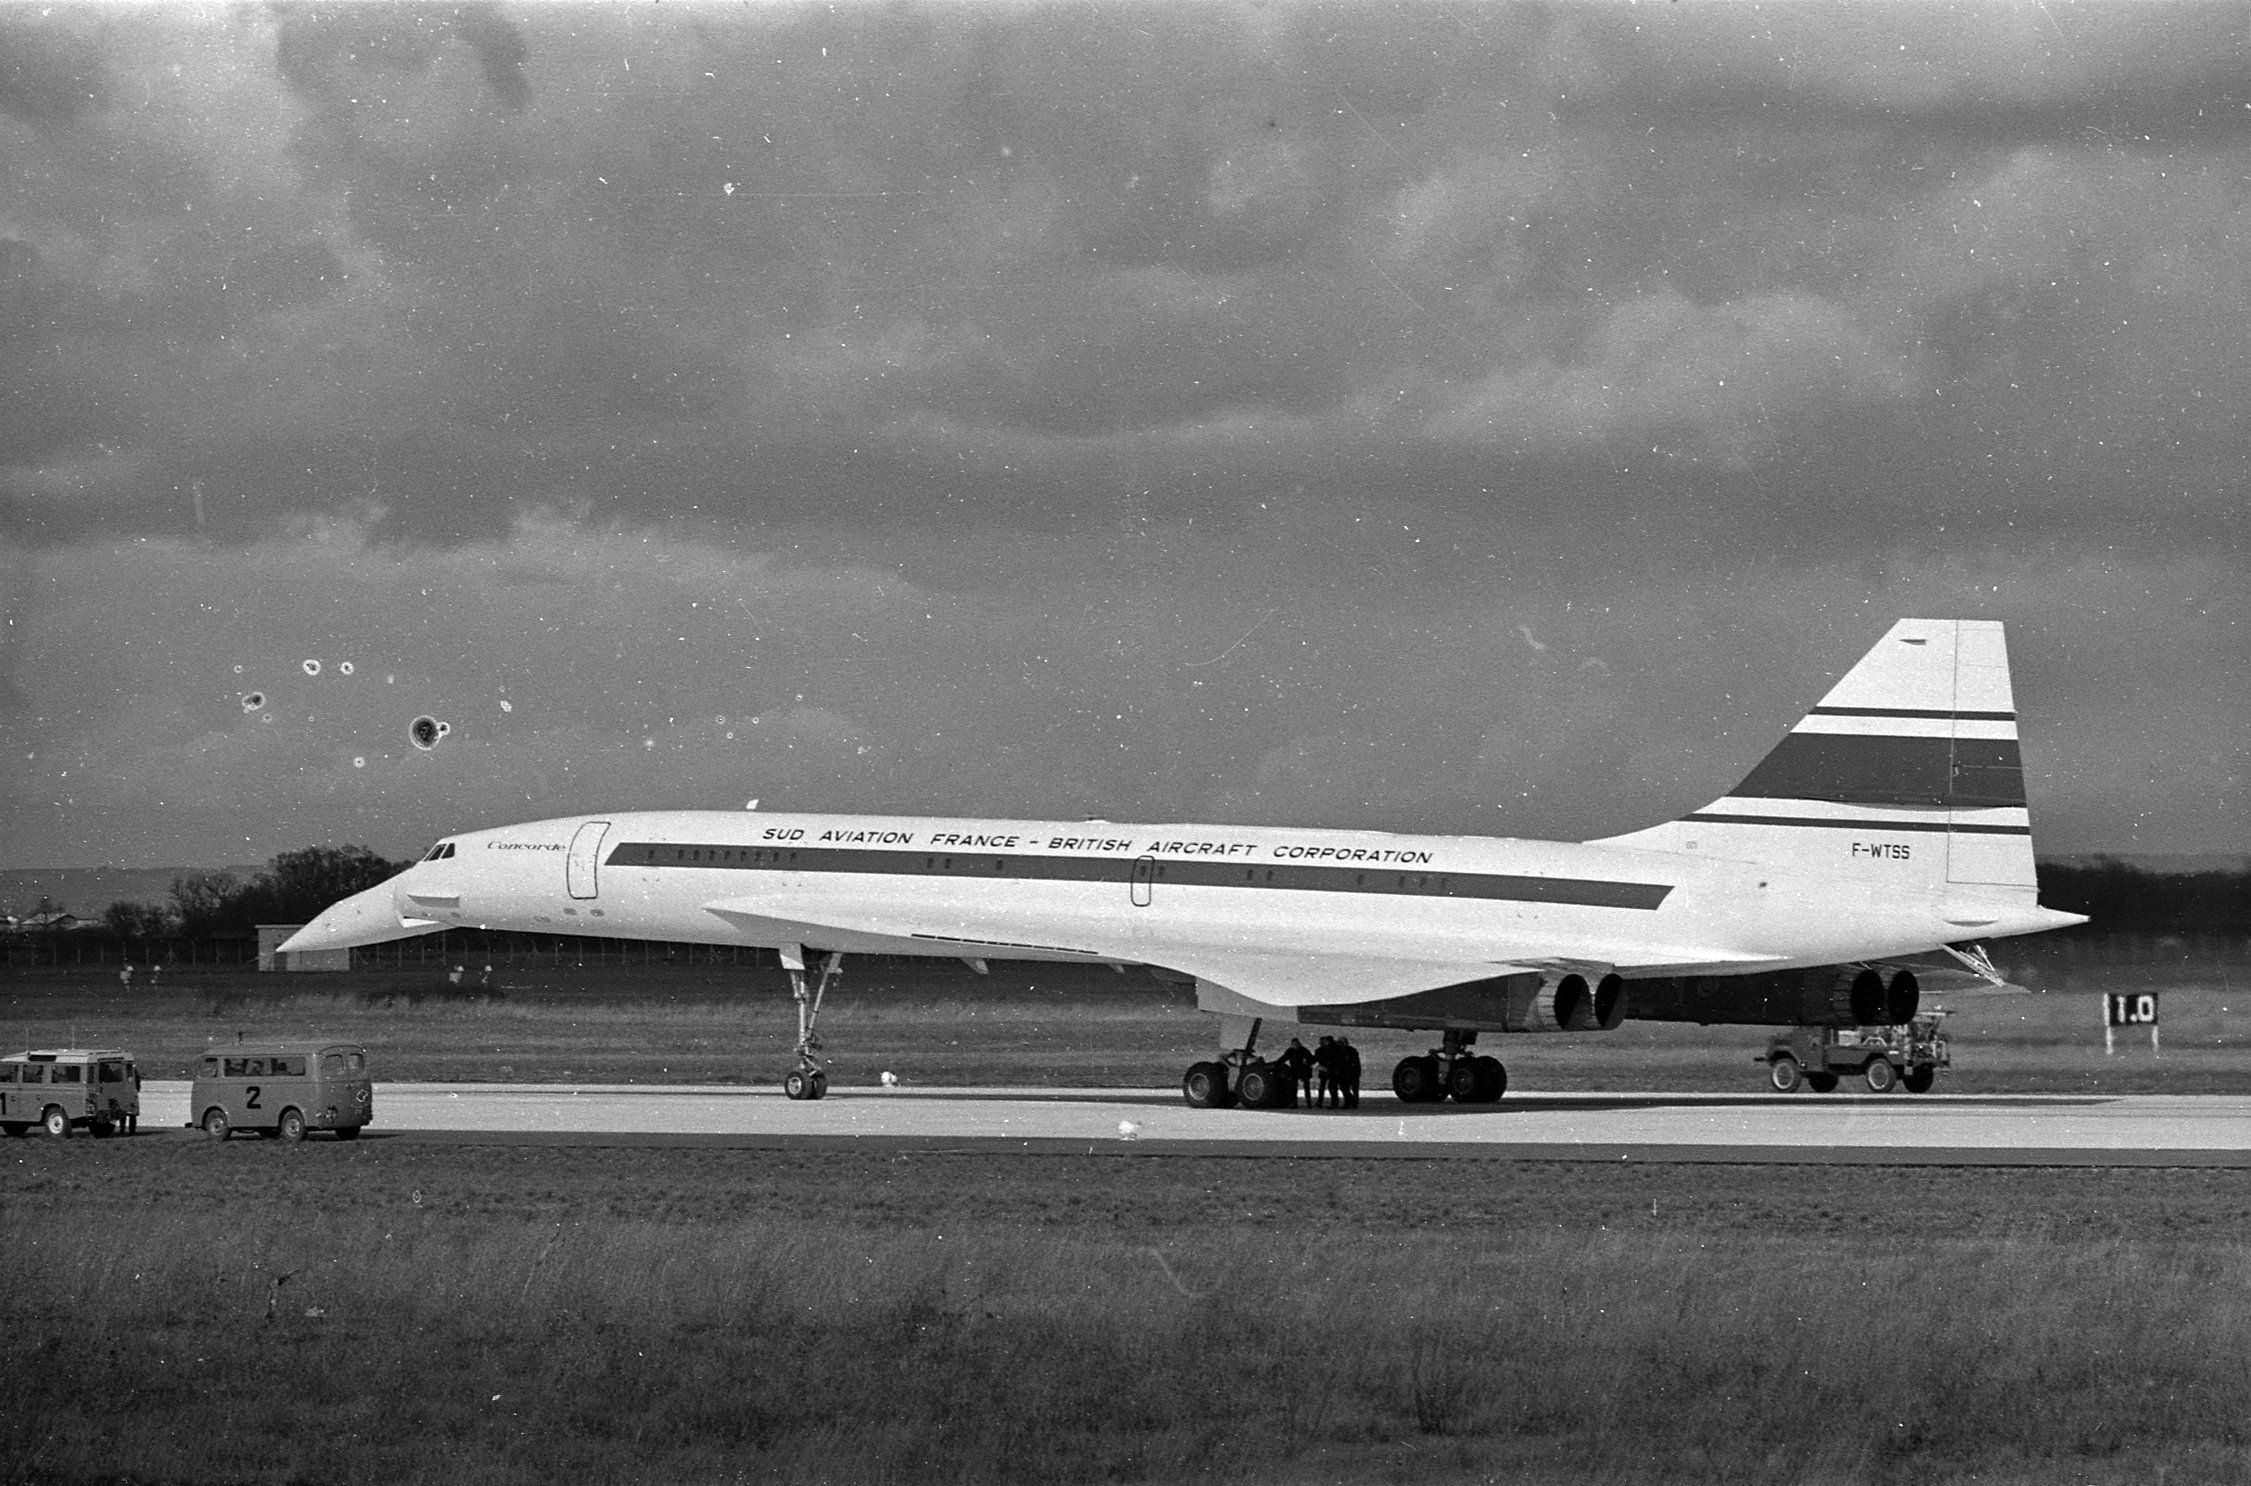 A black and white photo of Concorde on the runway.